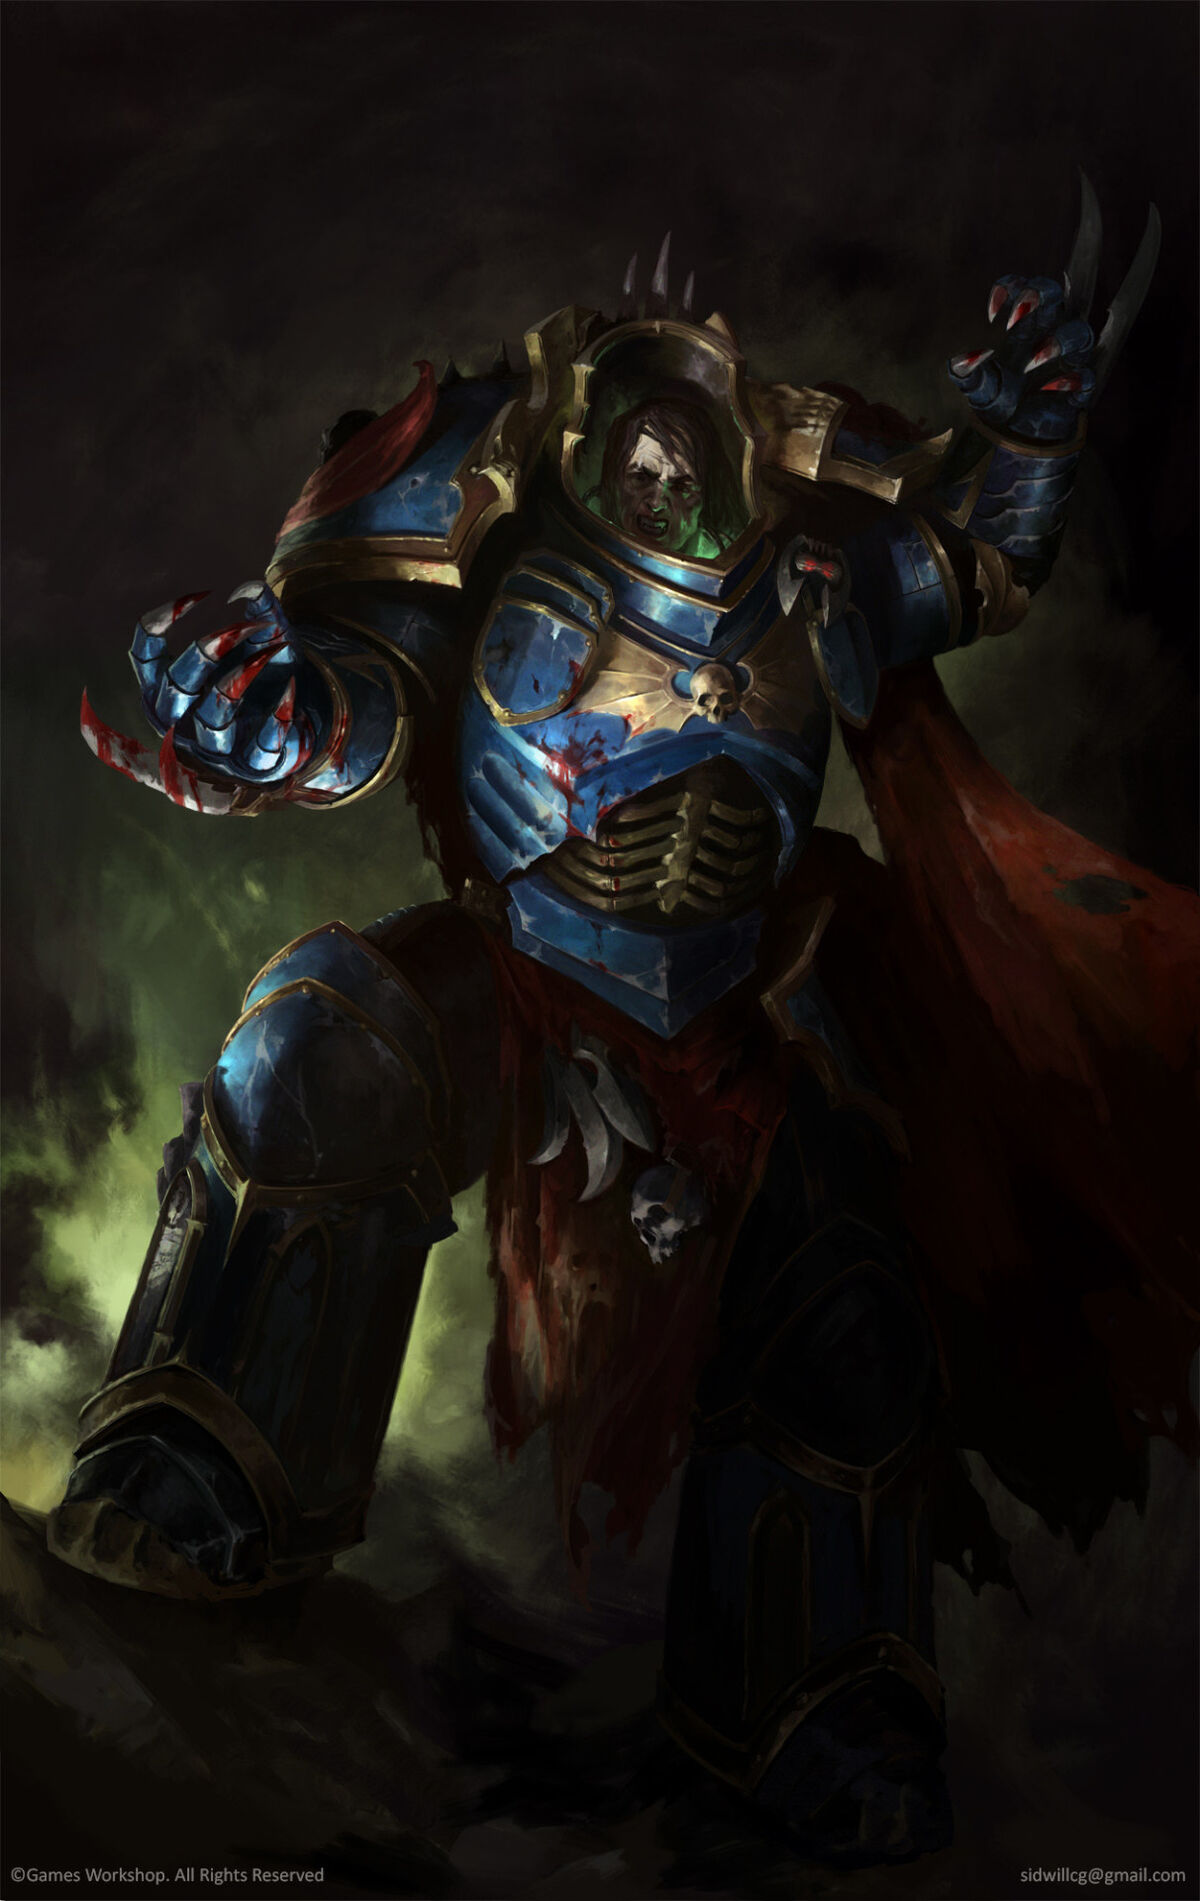 Who is the DARK KING?, The Single Greatest Change To Warhammer 40K